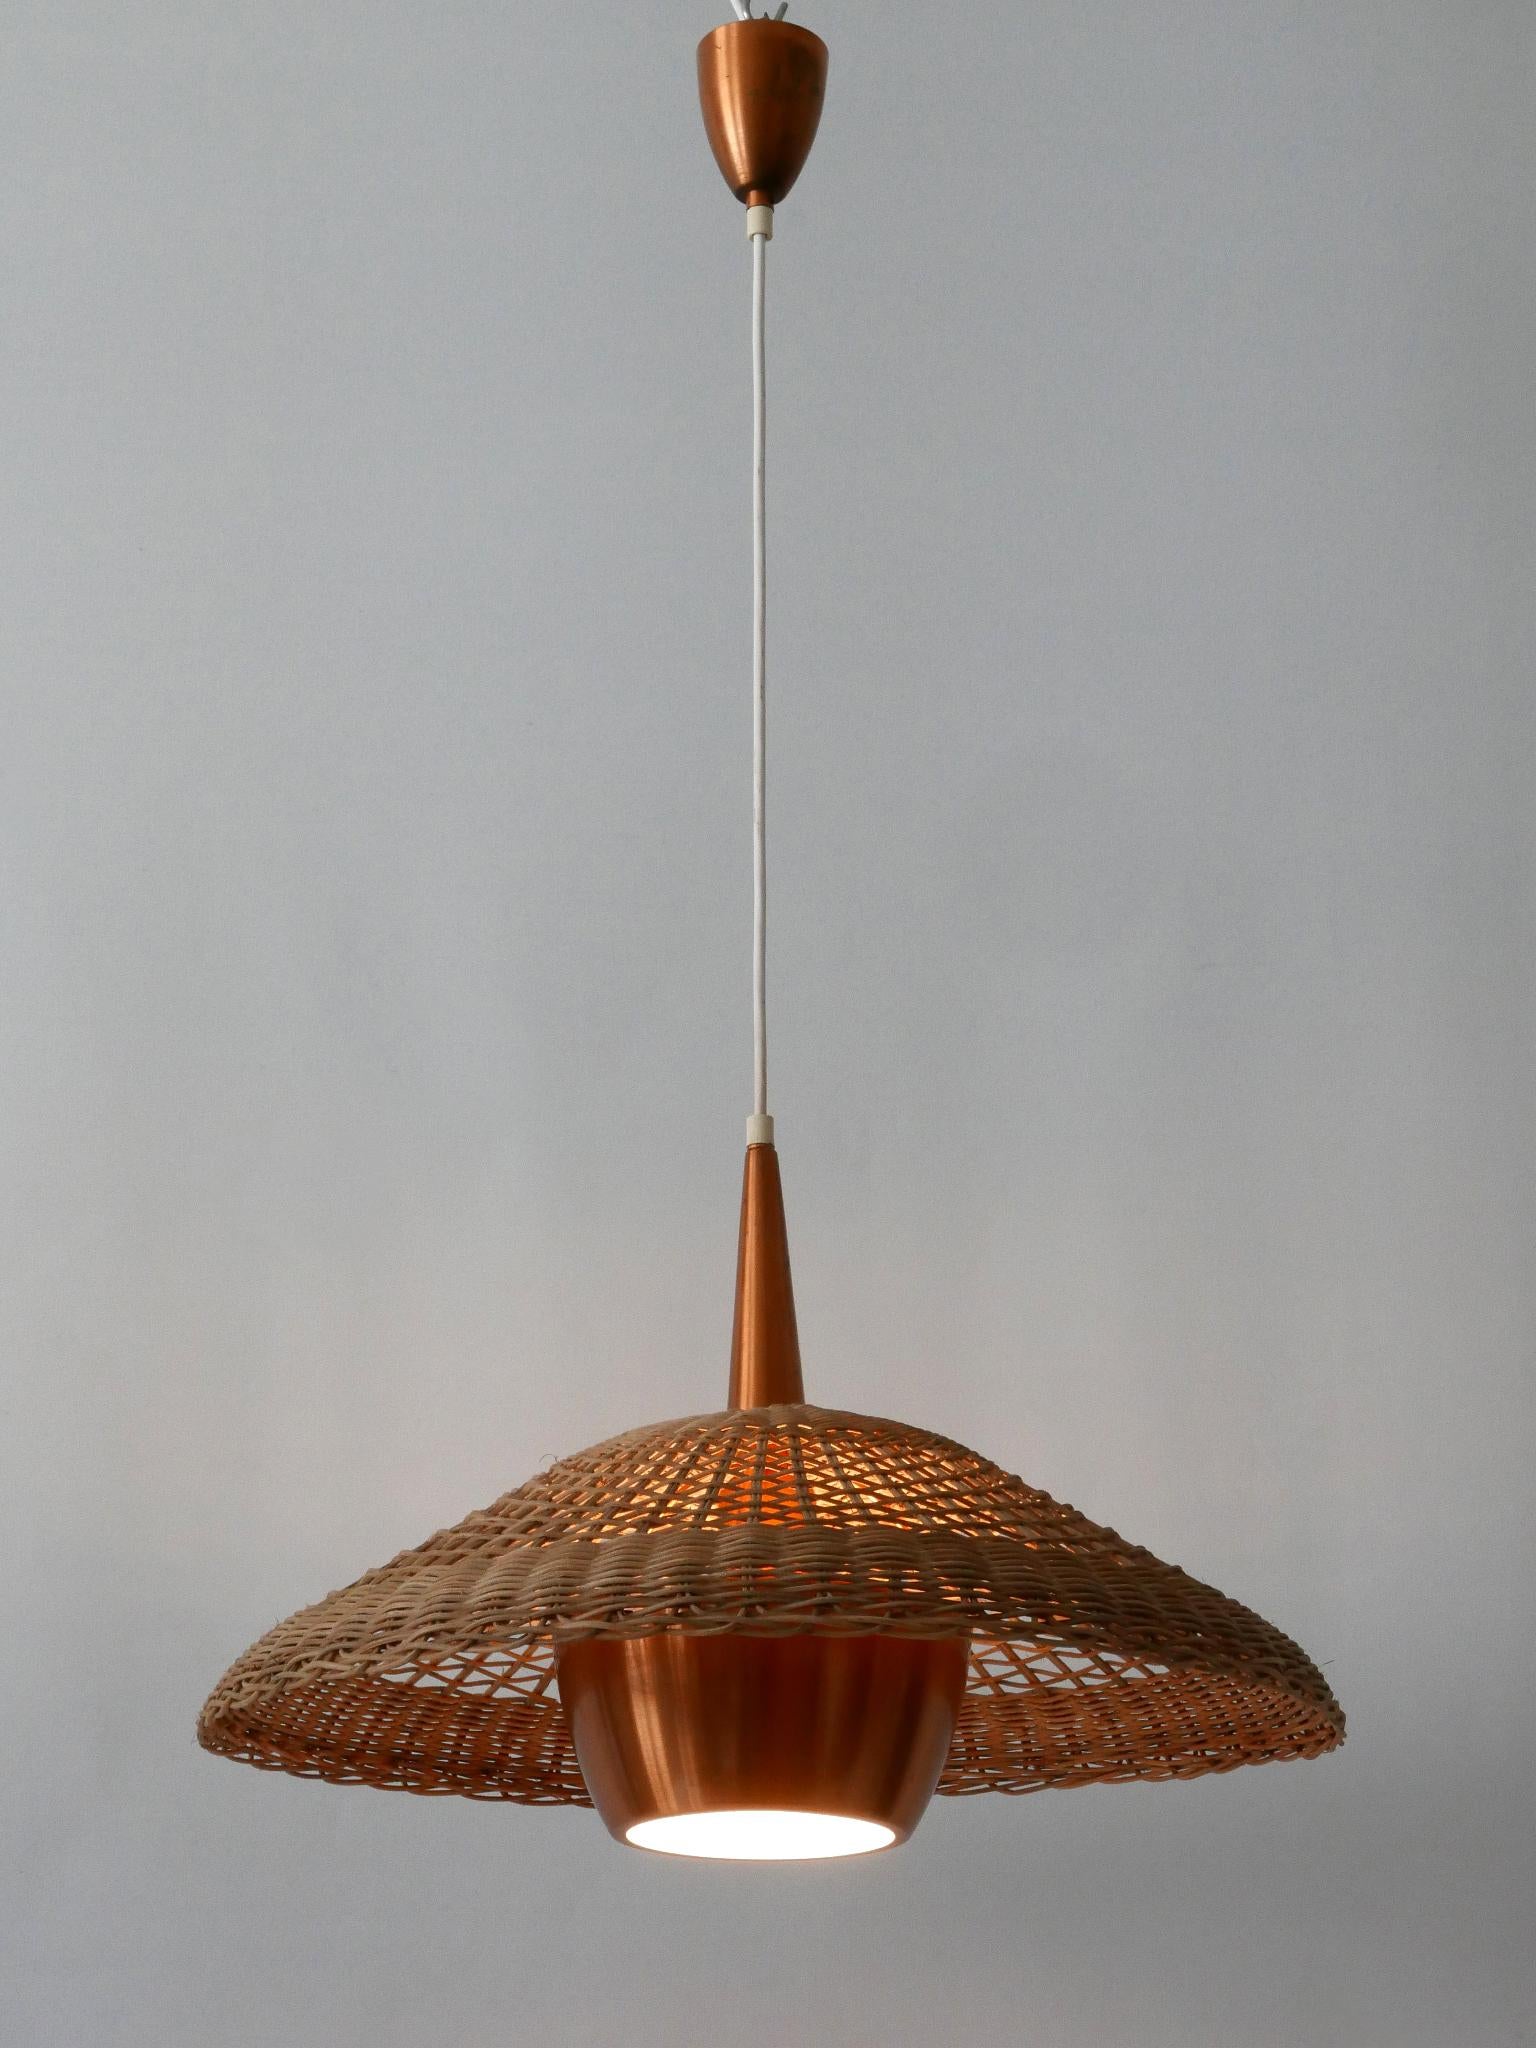 Large and highly decorative Mid-Century Modern pendant lamp or hanging light. Manufactured probably in 1970s, Denmark.

Executed in rattan and copper, the pendant lamp comes with 1 x E27 / E26 Edison screw fit bulb holder, is rewired and in working